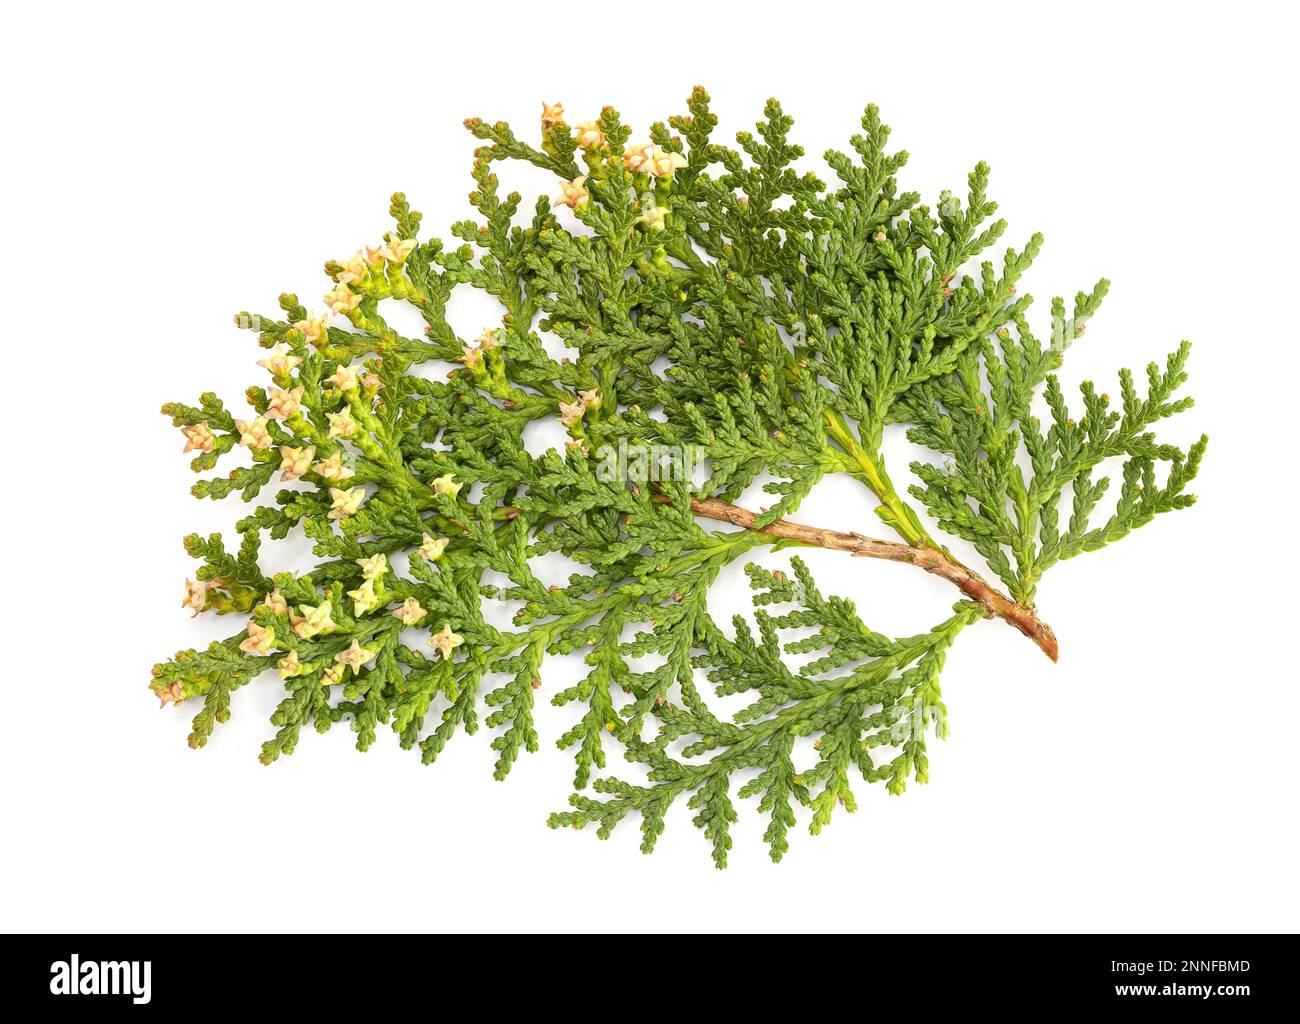 Platycladus fir twig with cones isolated on white background. Platycladus orientalis Stock Photo